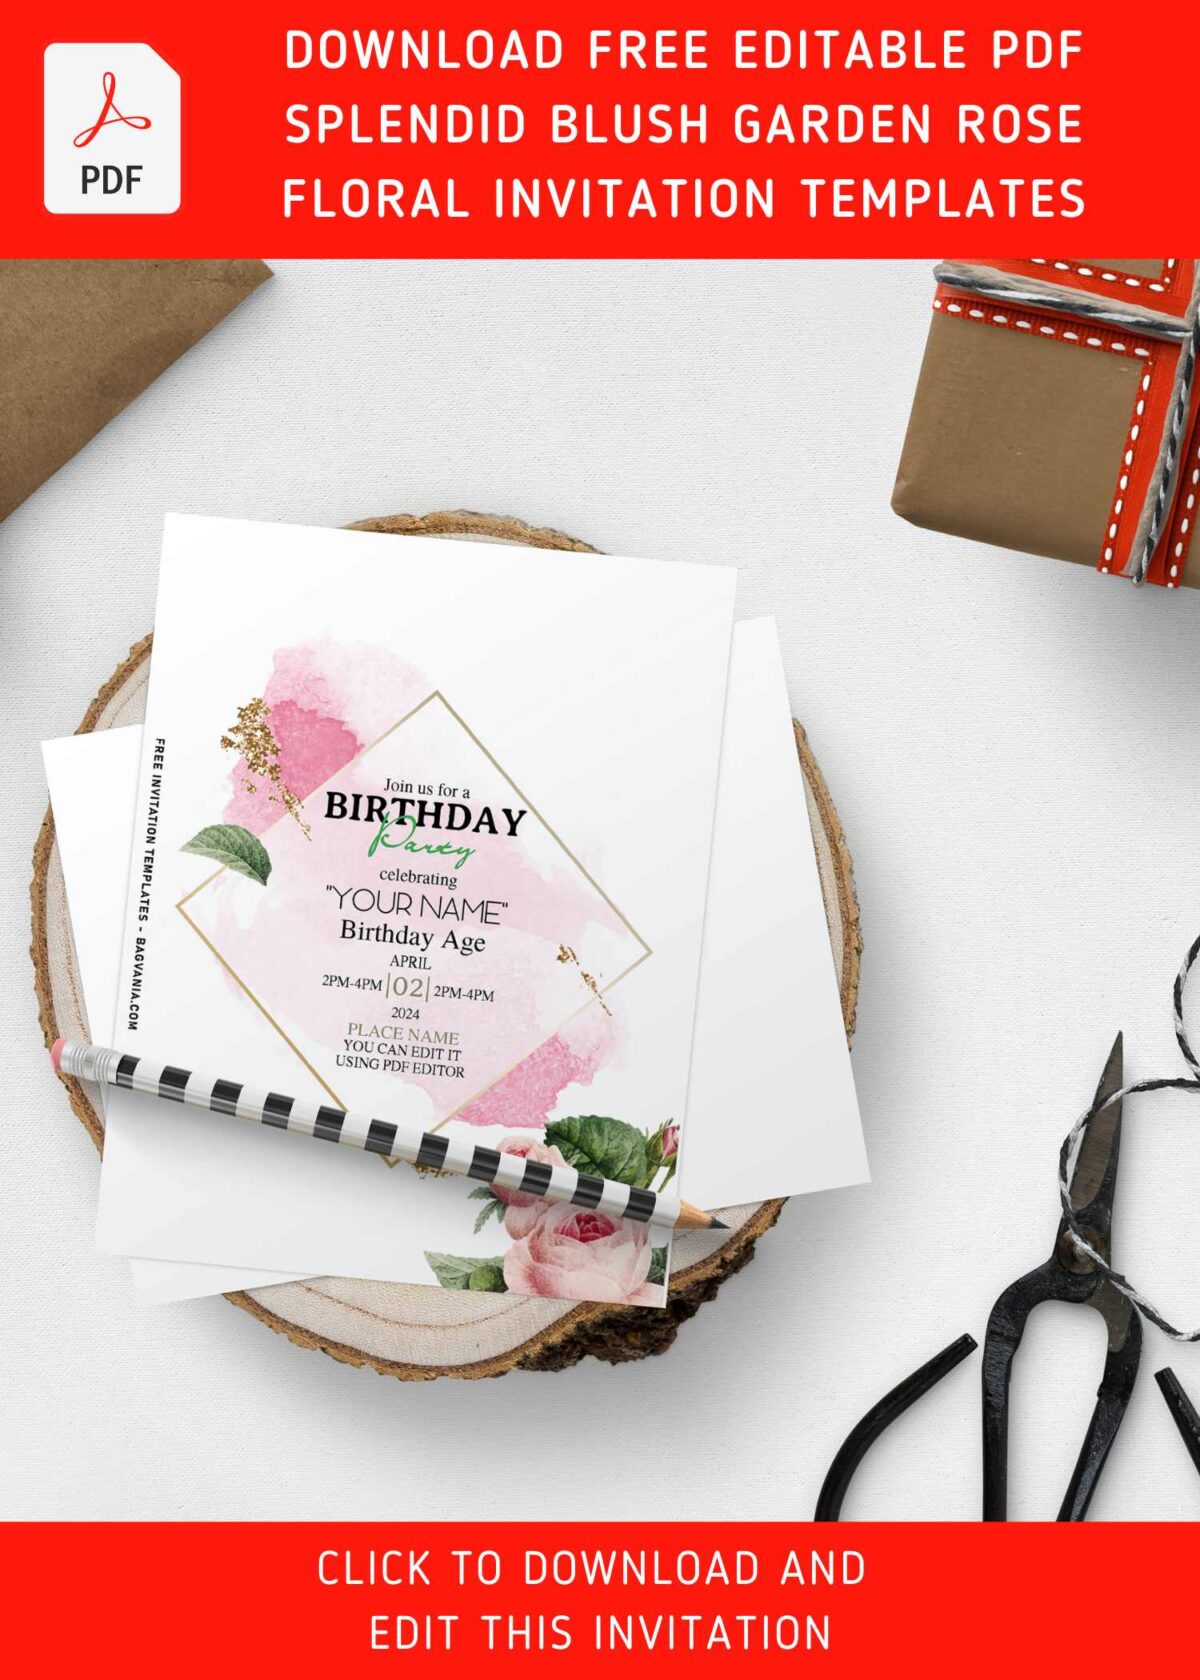 (Free Editable PDF) Splendid Blush Rose Garden Birthday Party Invitation Templates with aesthetic watercolor roses